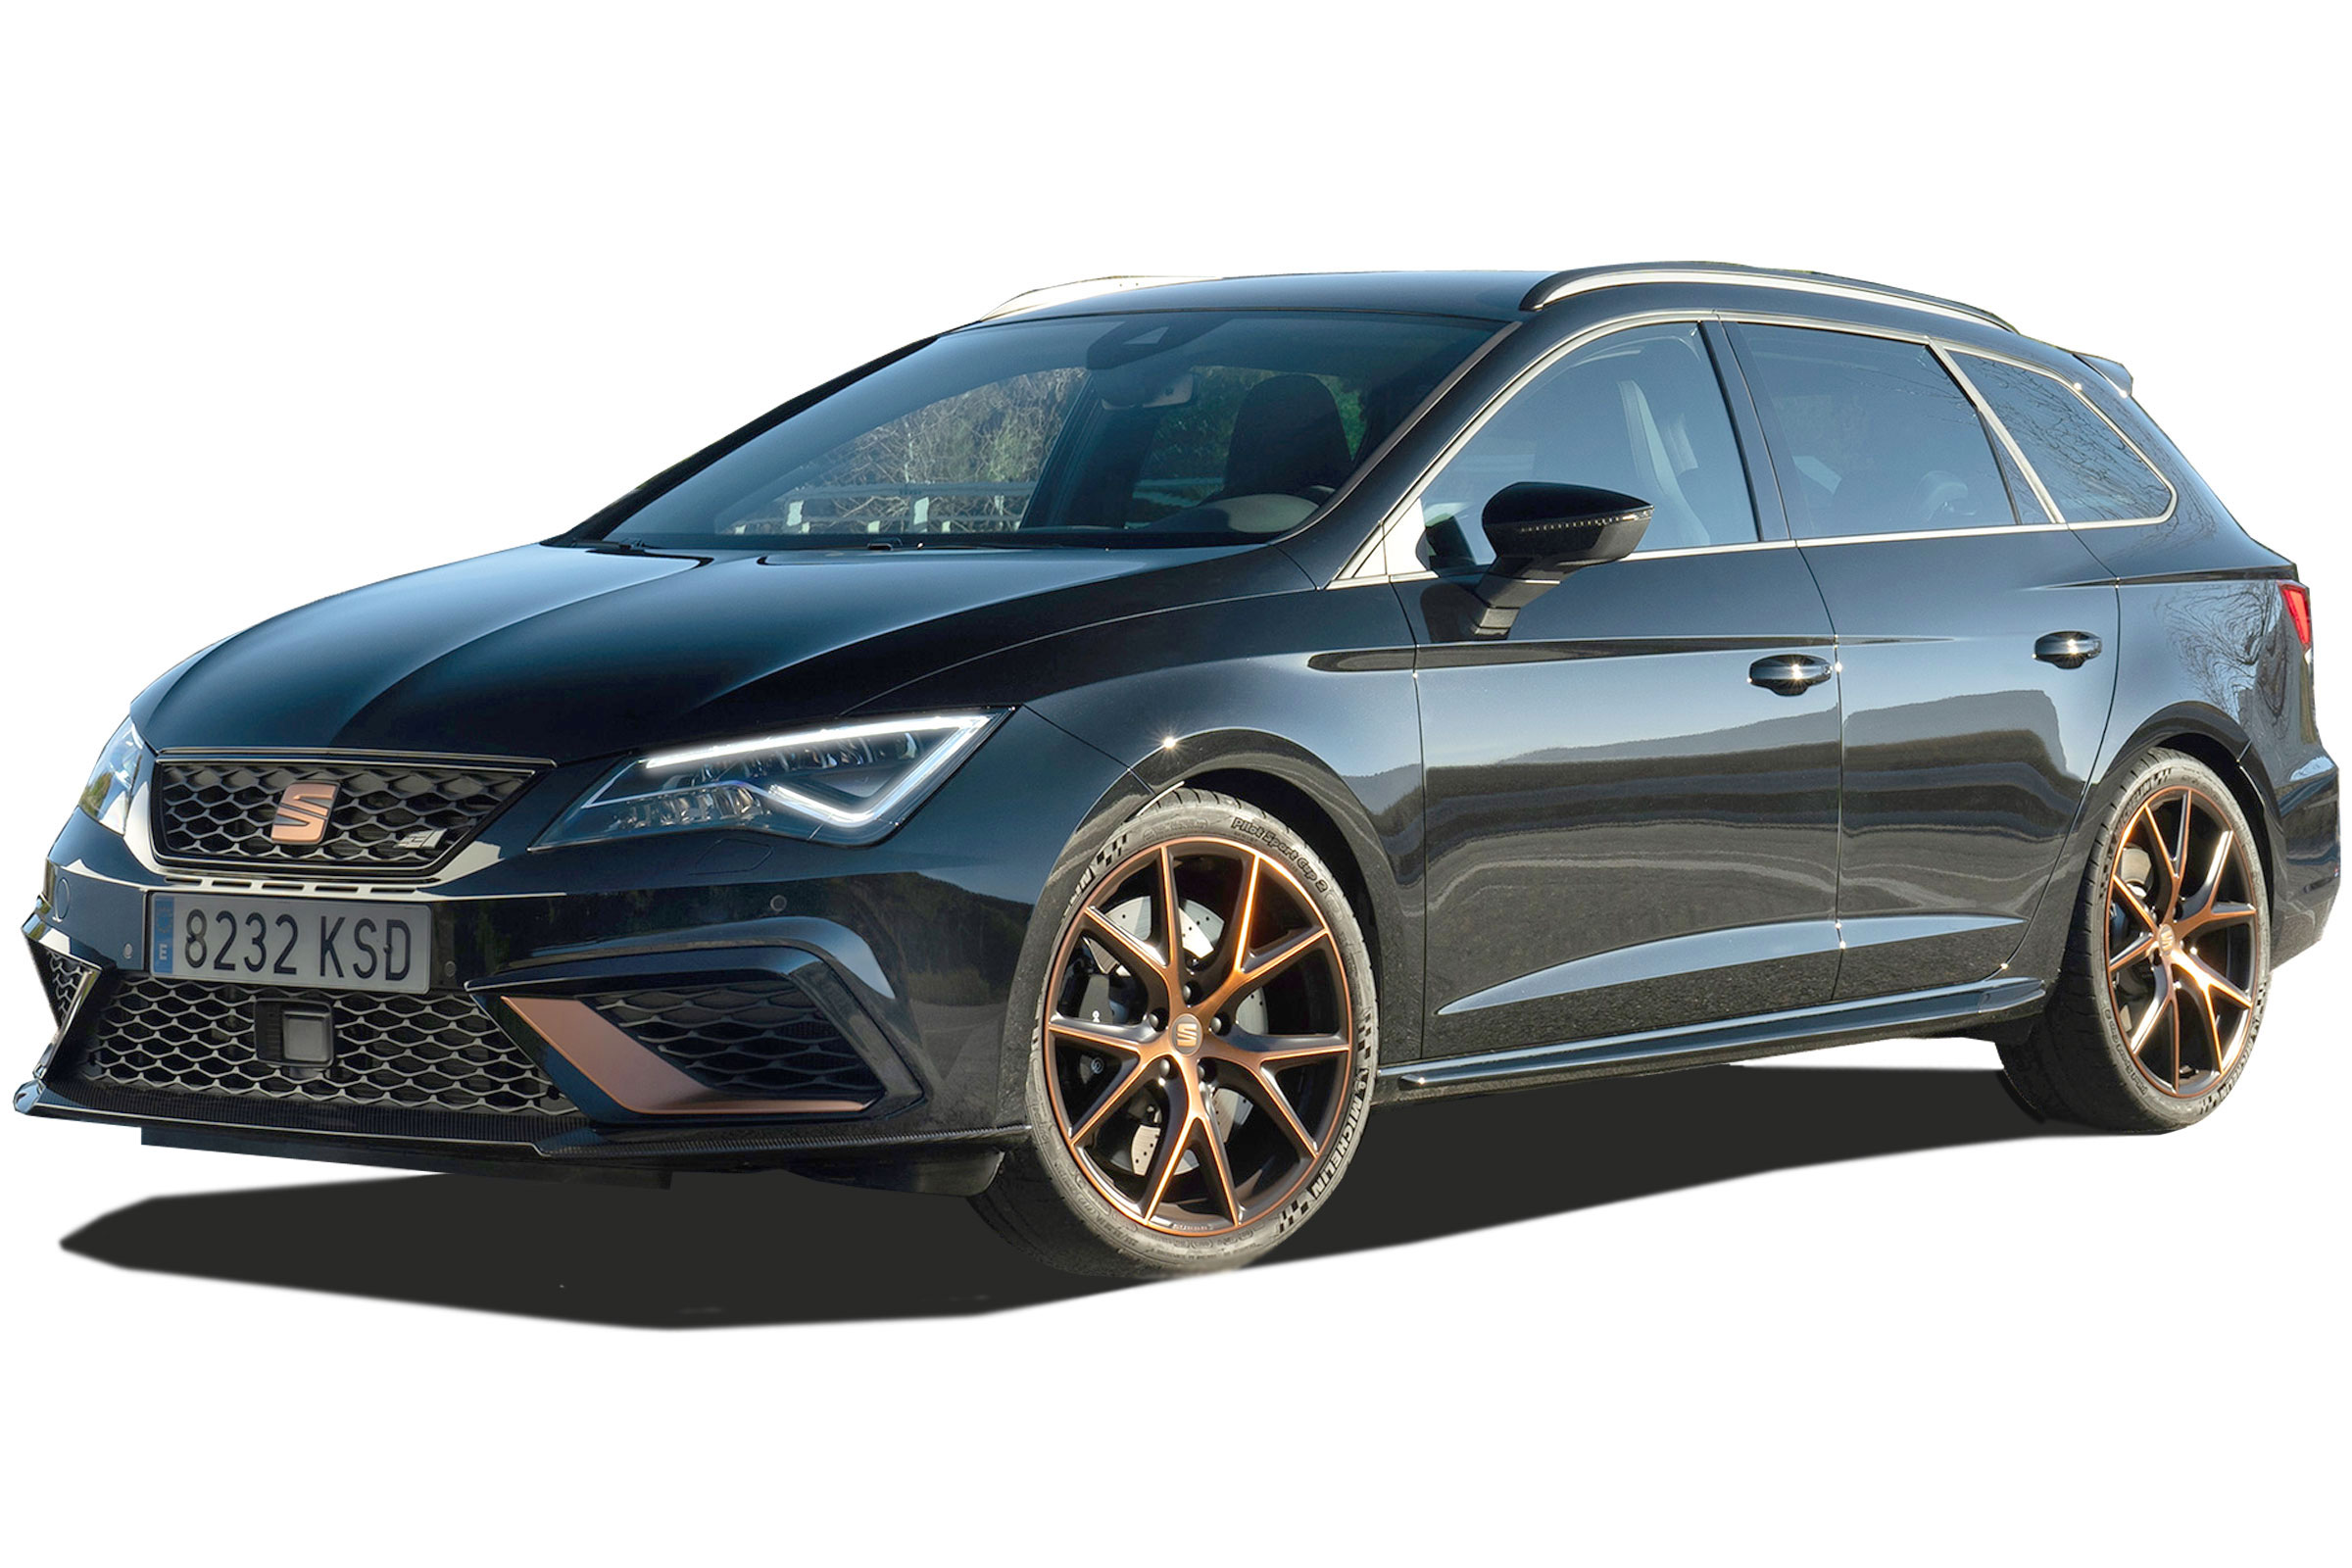 Seat Leon (2013-2020) review - Which?